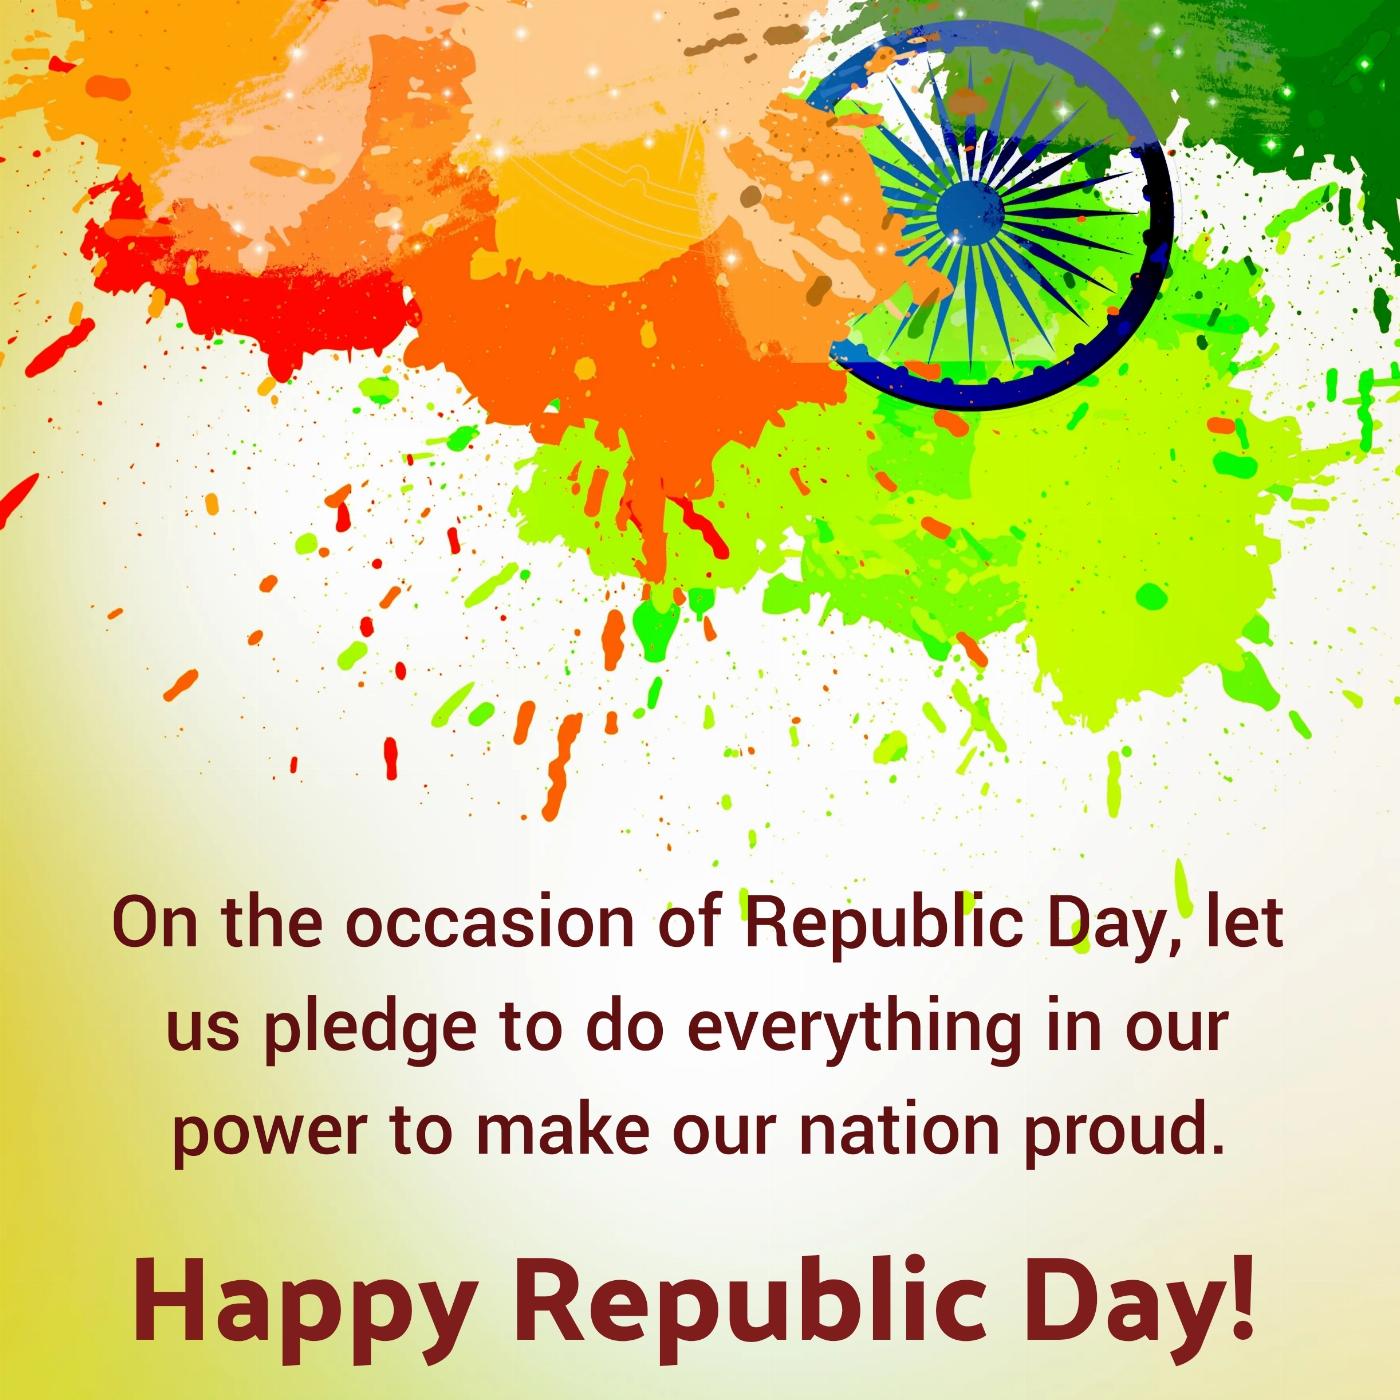 On the occasion of Republic Day let us pledge